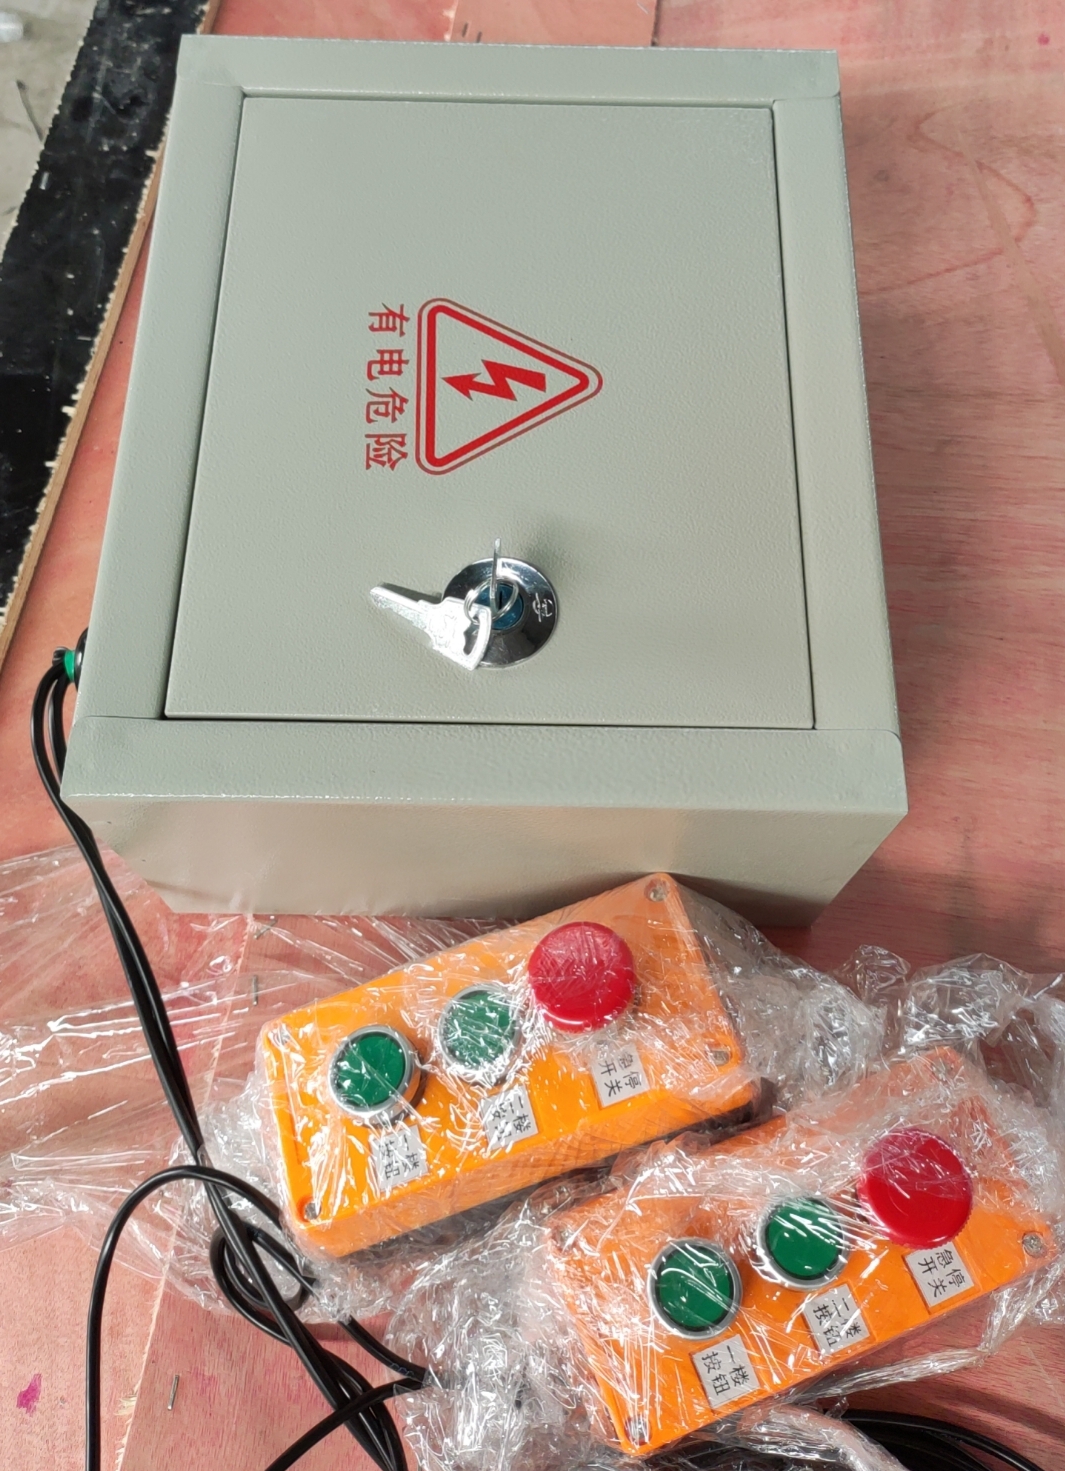 controller and control box